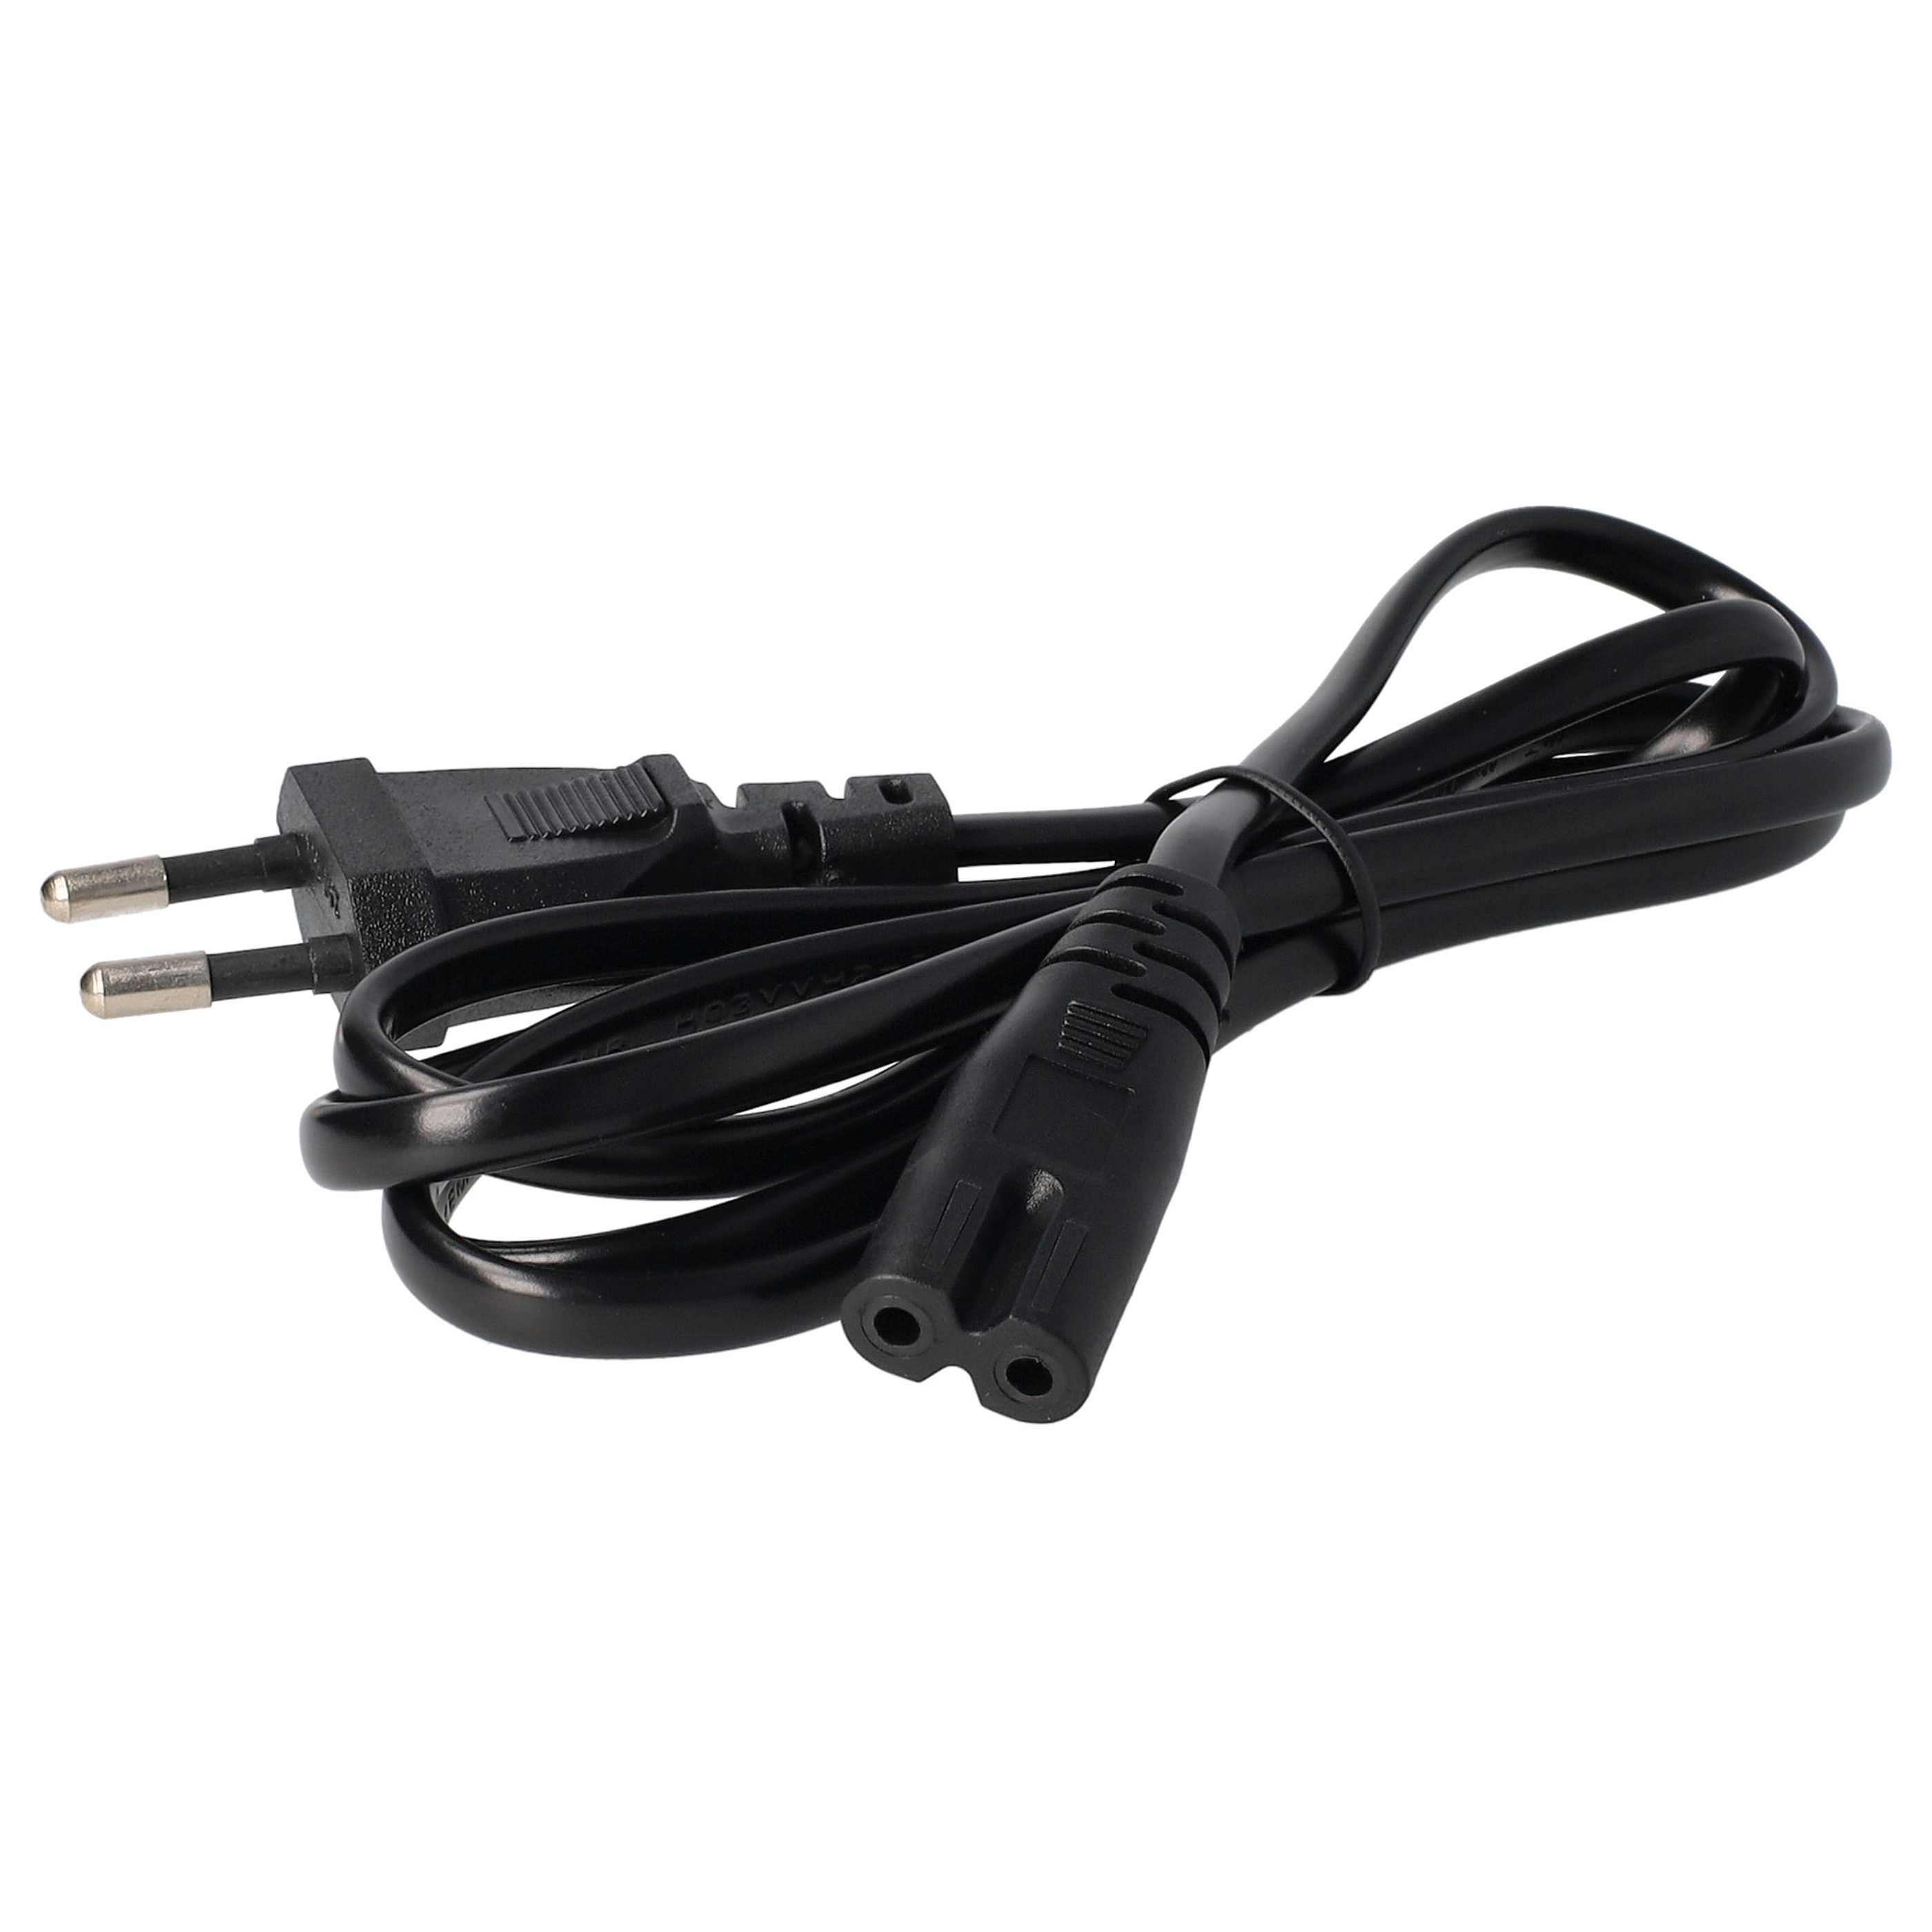 Mains Power Adapter replaces Samsung AD-3014STN, ADS-30NJ-12, AD-4214N, AD-4214L for Samsung Monitor - 200 cm